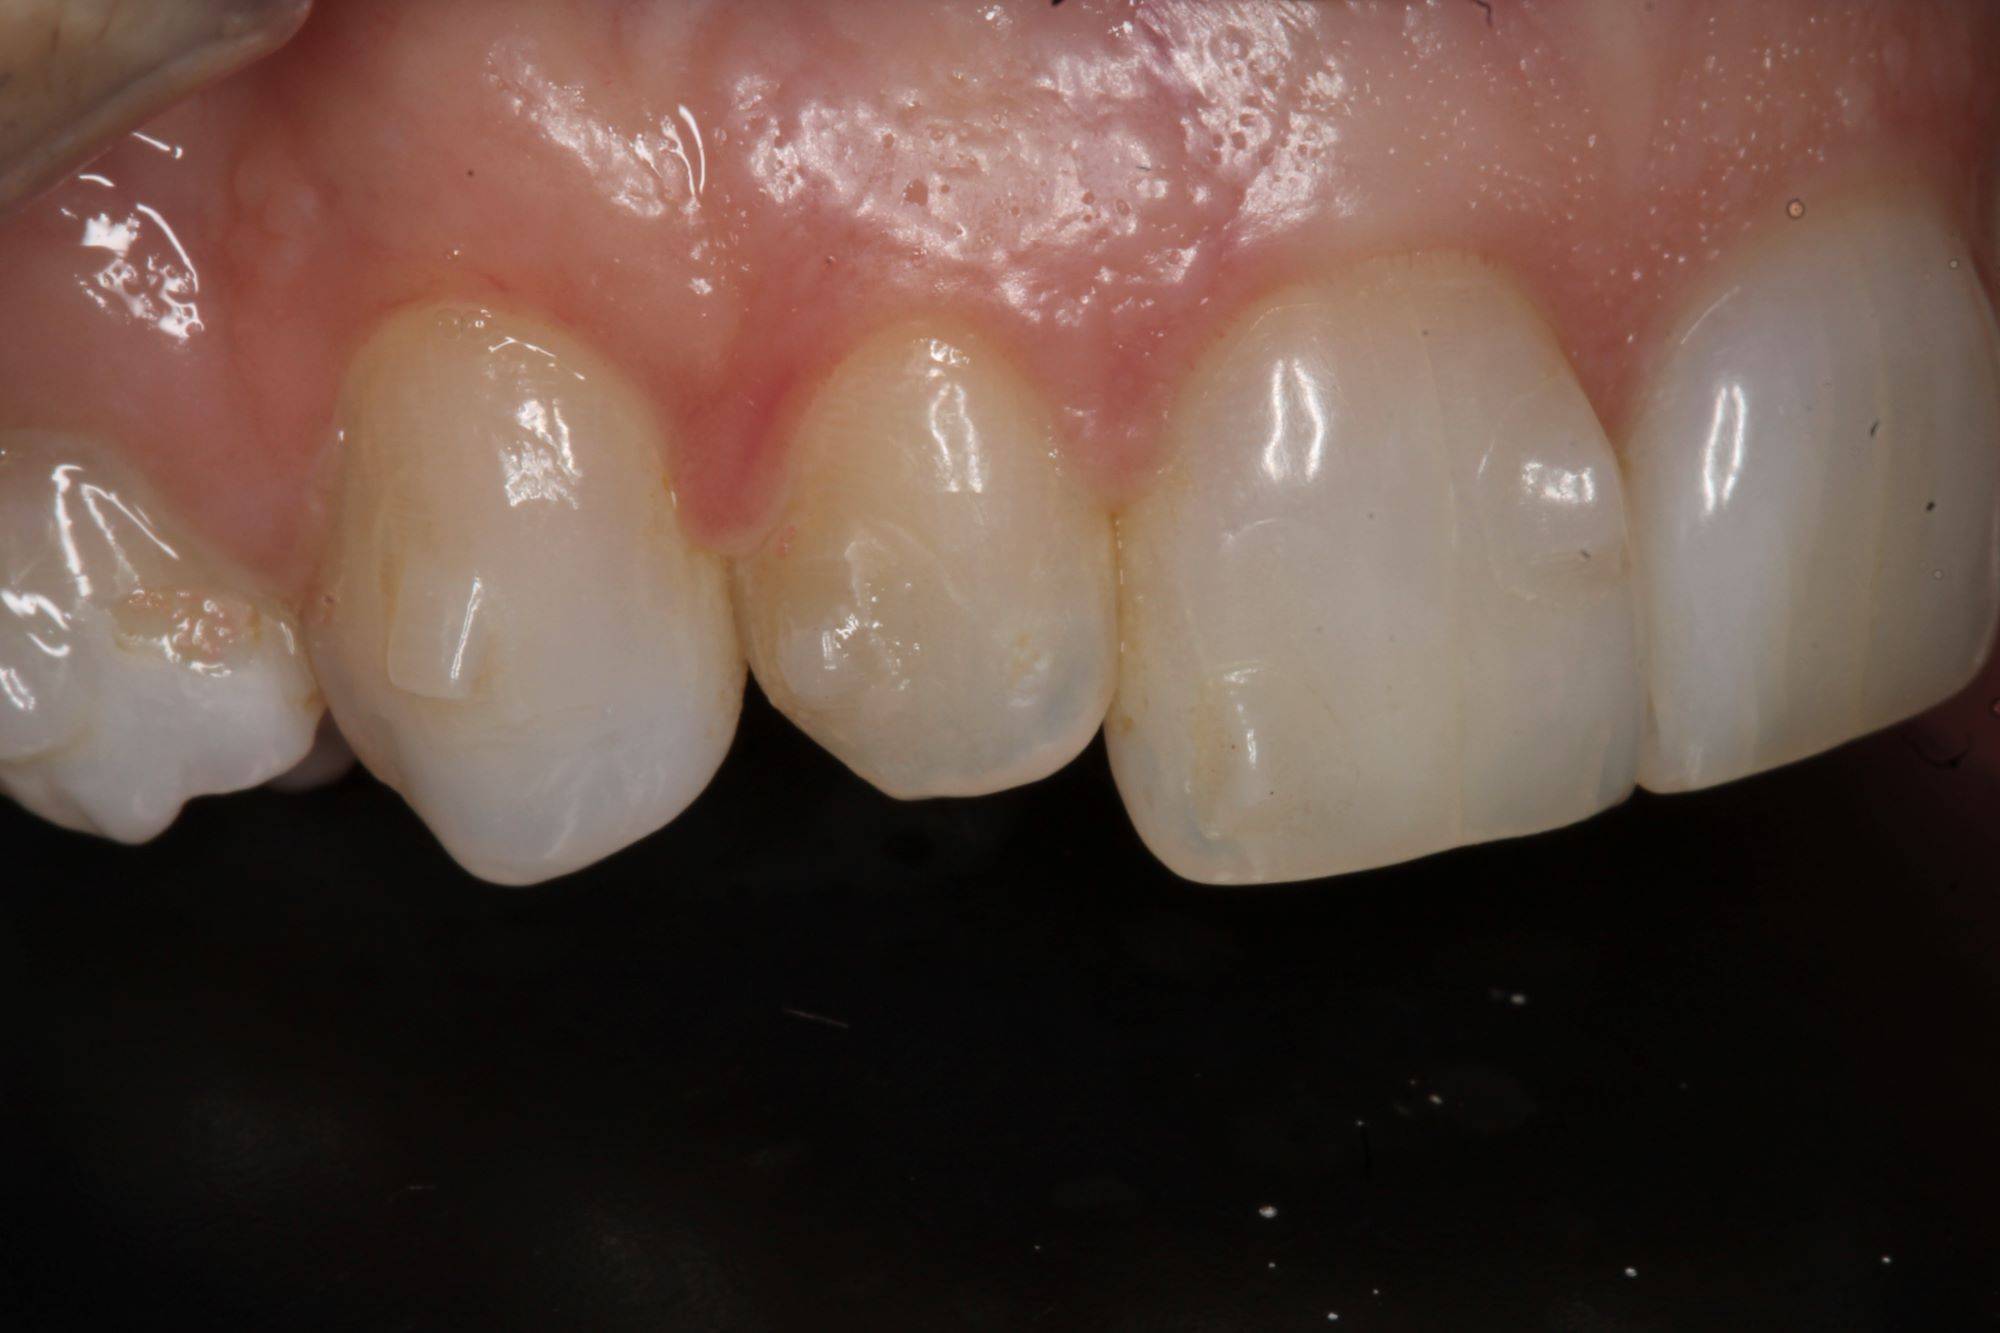 Smile close-up showing uneven lateral incisor pre procedure